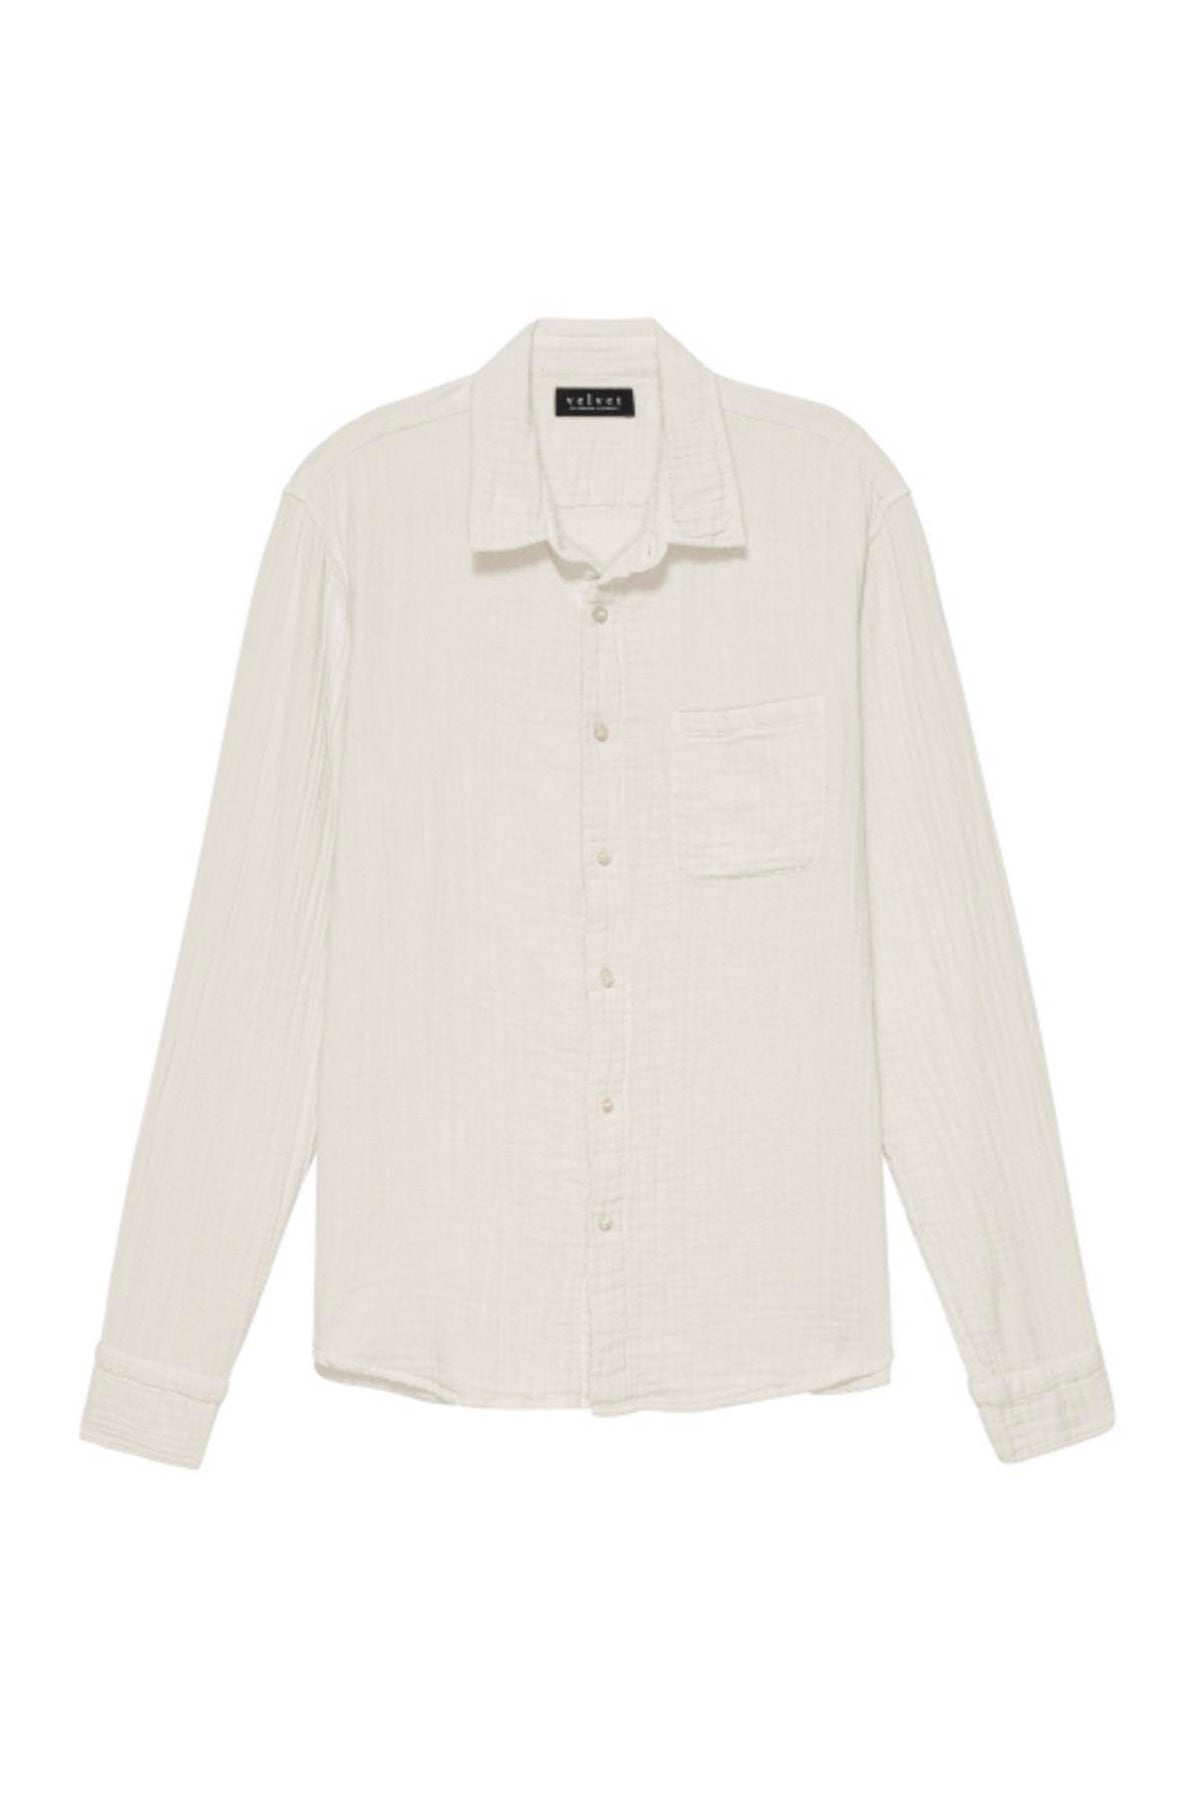   A plain white, long-sleeved Velvet by Graham & Spencer ELTON COTTON GAUZE BUTTON-UP SHIRT with a collar and double button cuff, displayed against a white background. 